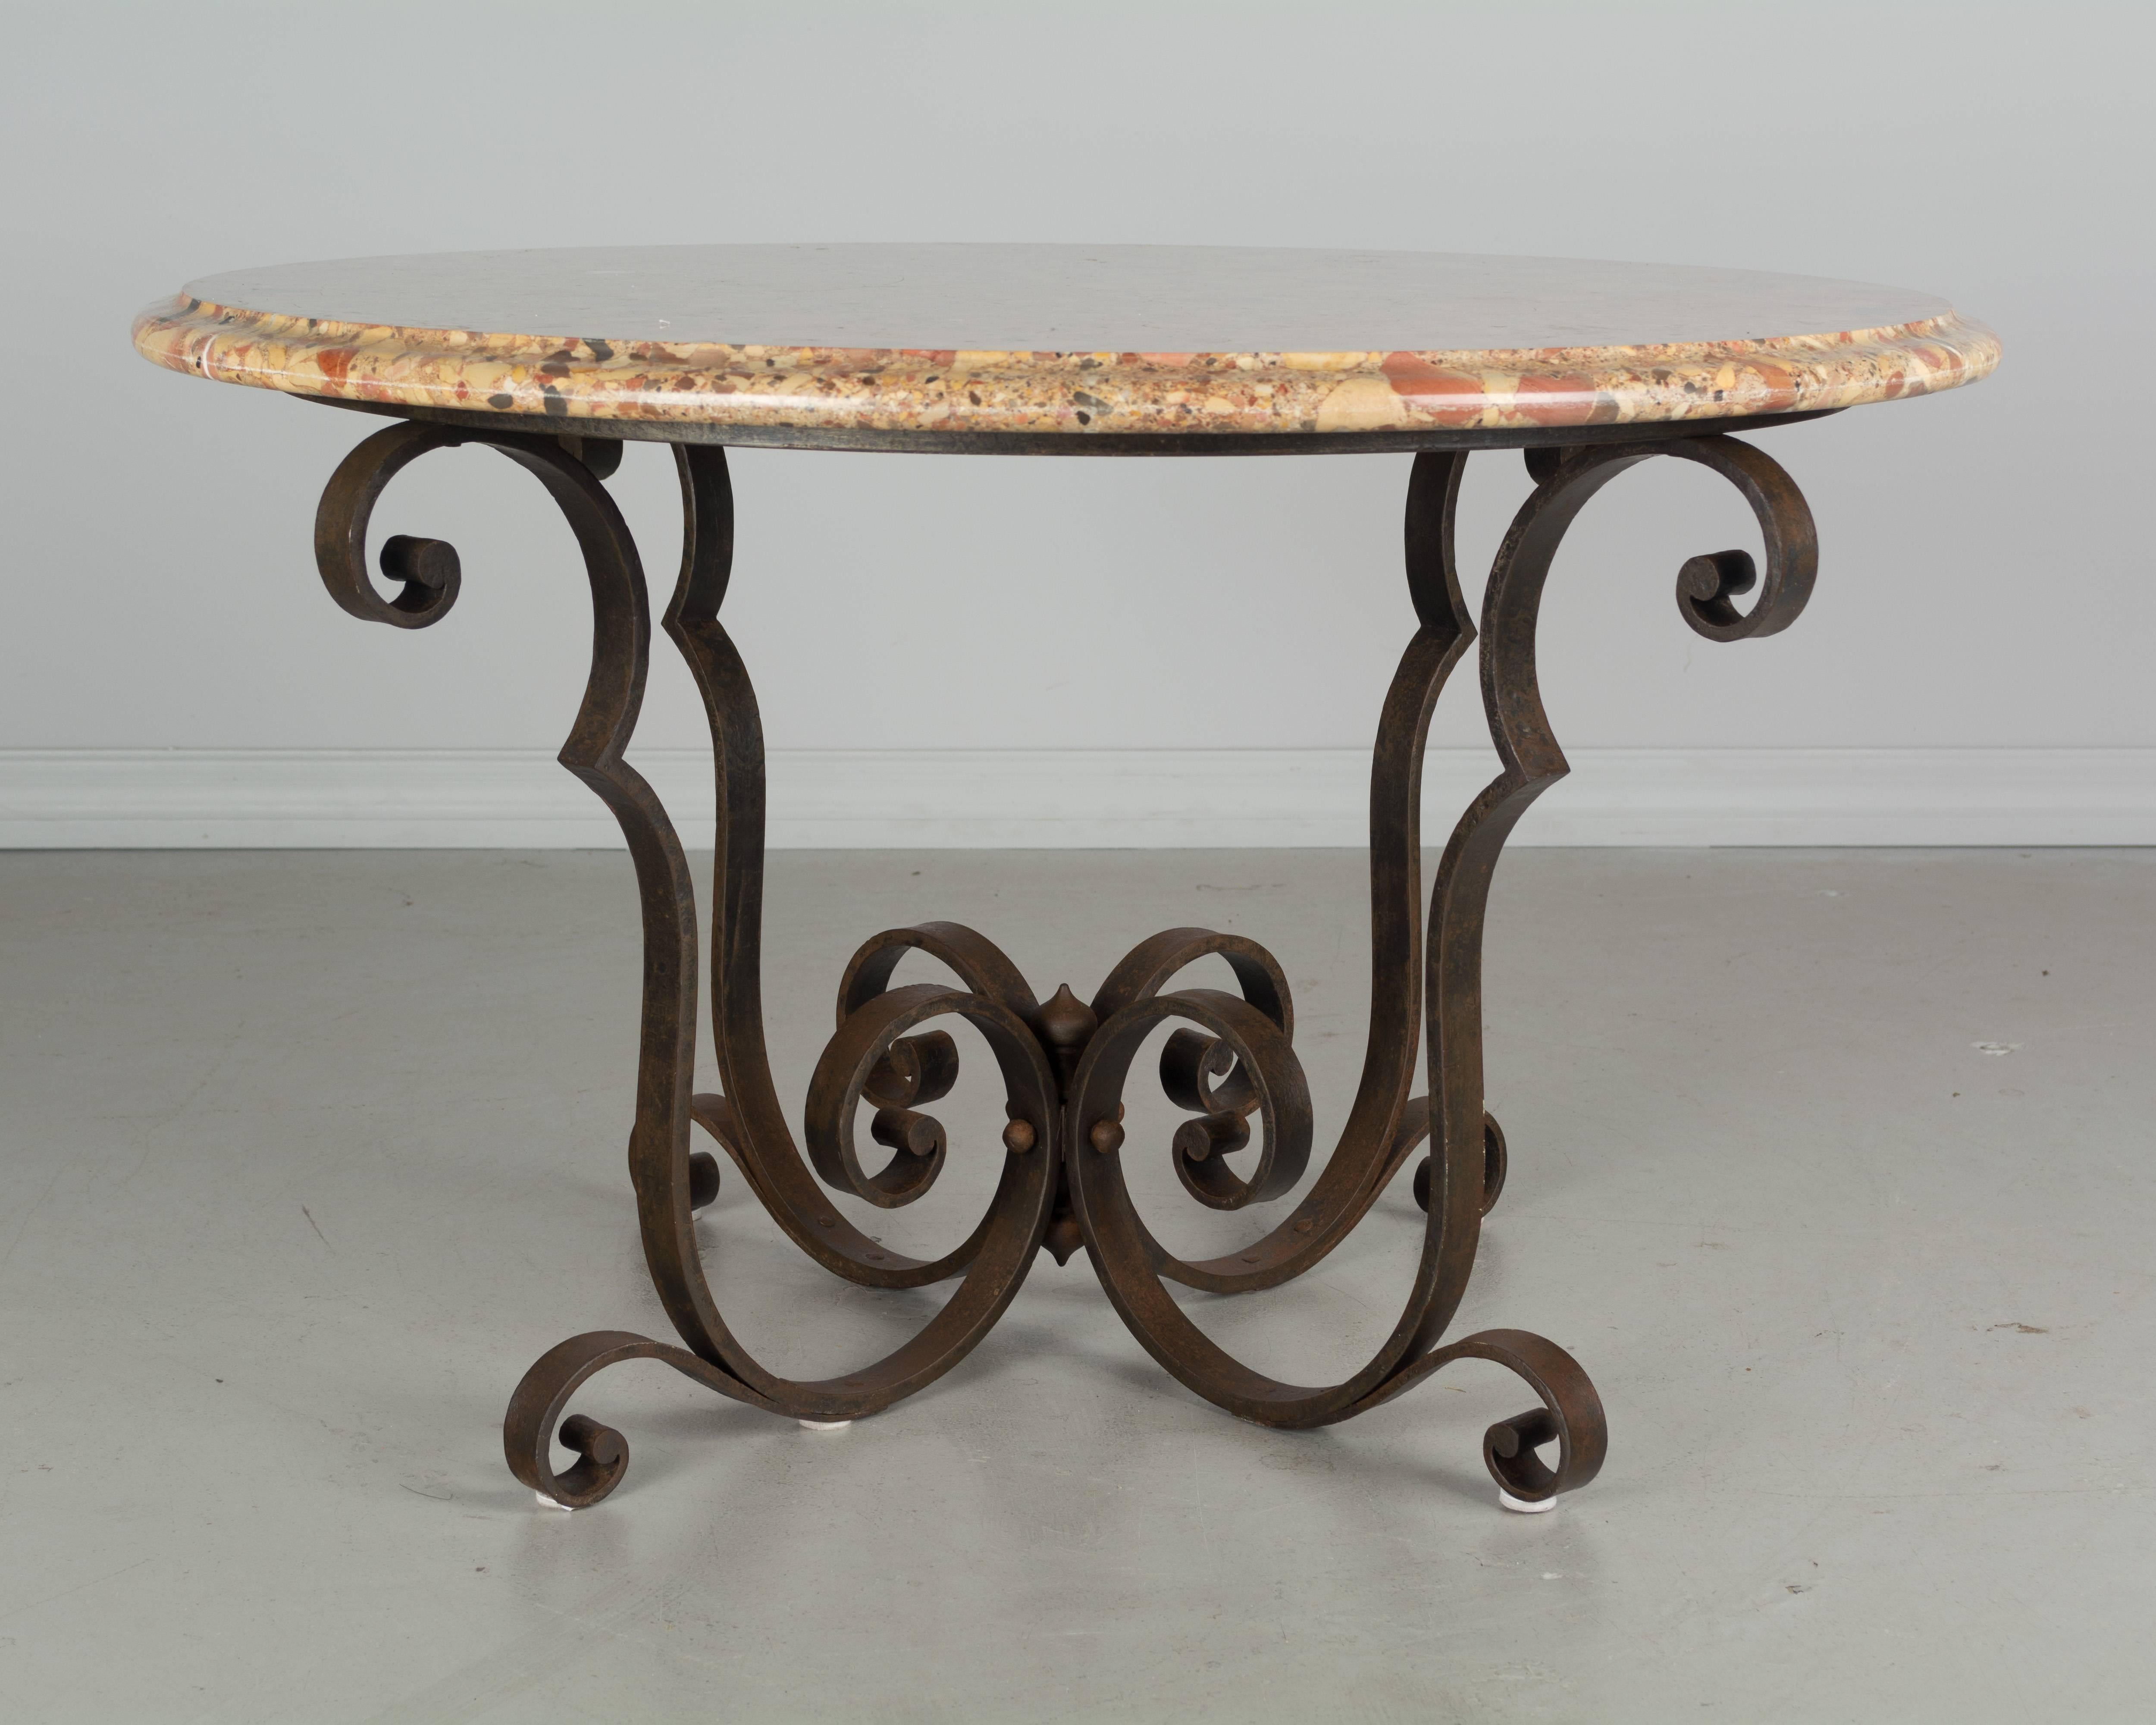 French Art Deco wrought iron coffee table with original Breche d'Alep marble top. 
More photos available upon request. Please visit our showroom in Winter Park, Florida.